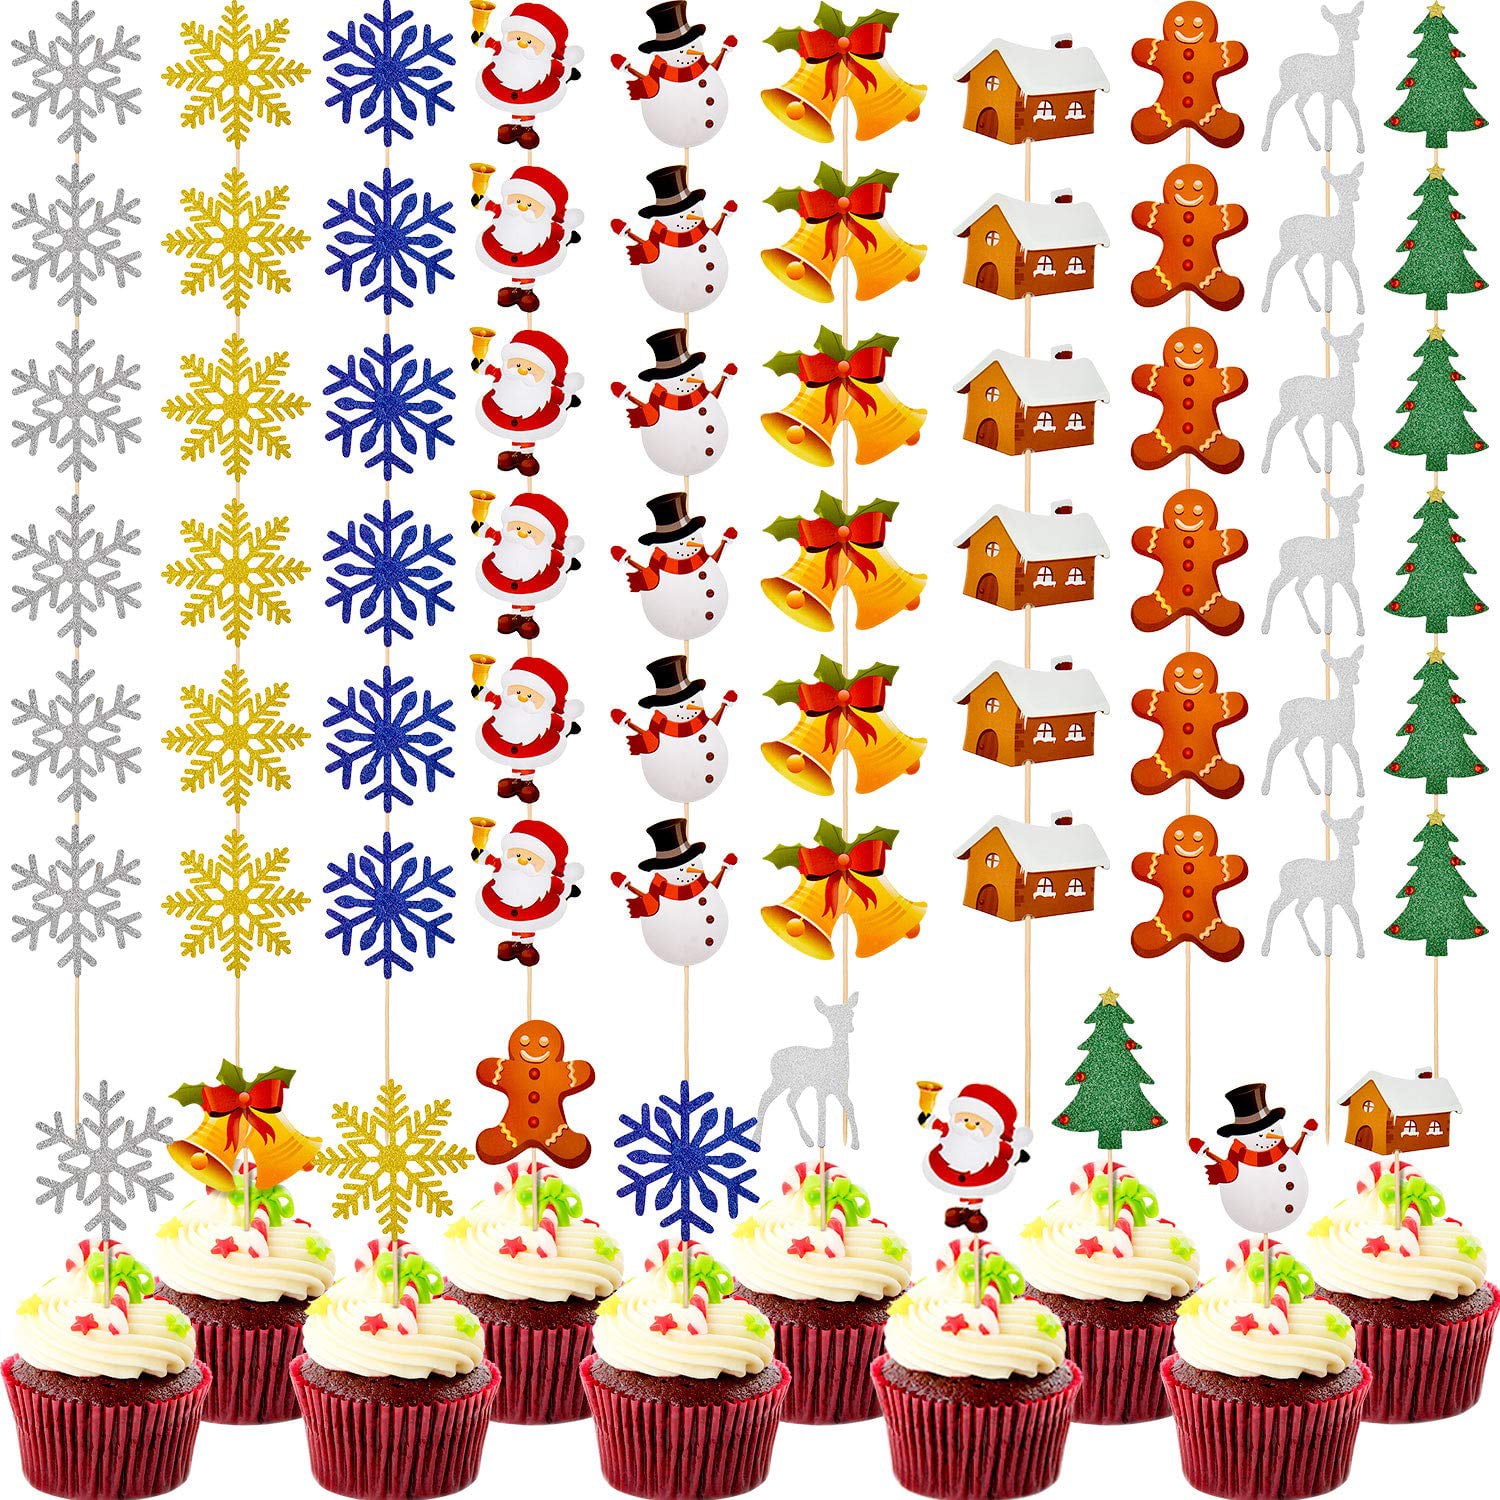 60 Pieces Christmas Cupcake Toppers Glitter Cake Picks Xmas Party Cupcake Cake Topper for Christmas Wedding Decoration Supplies 10 Styles